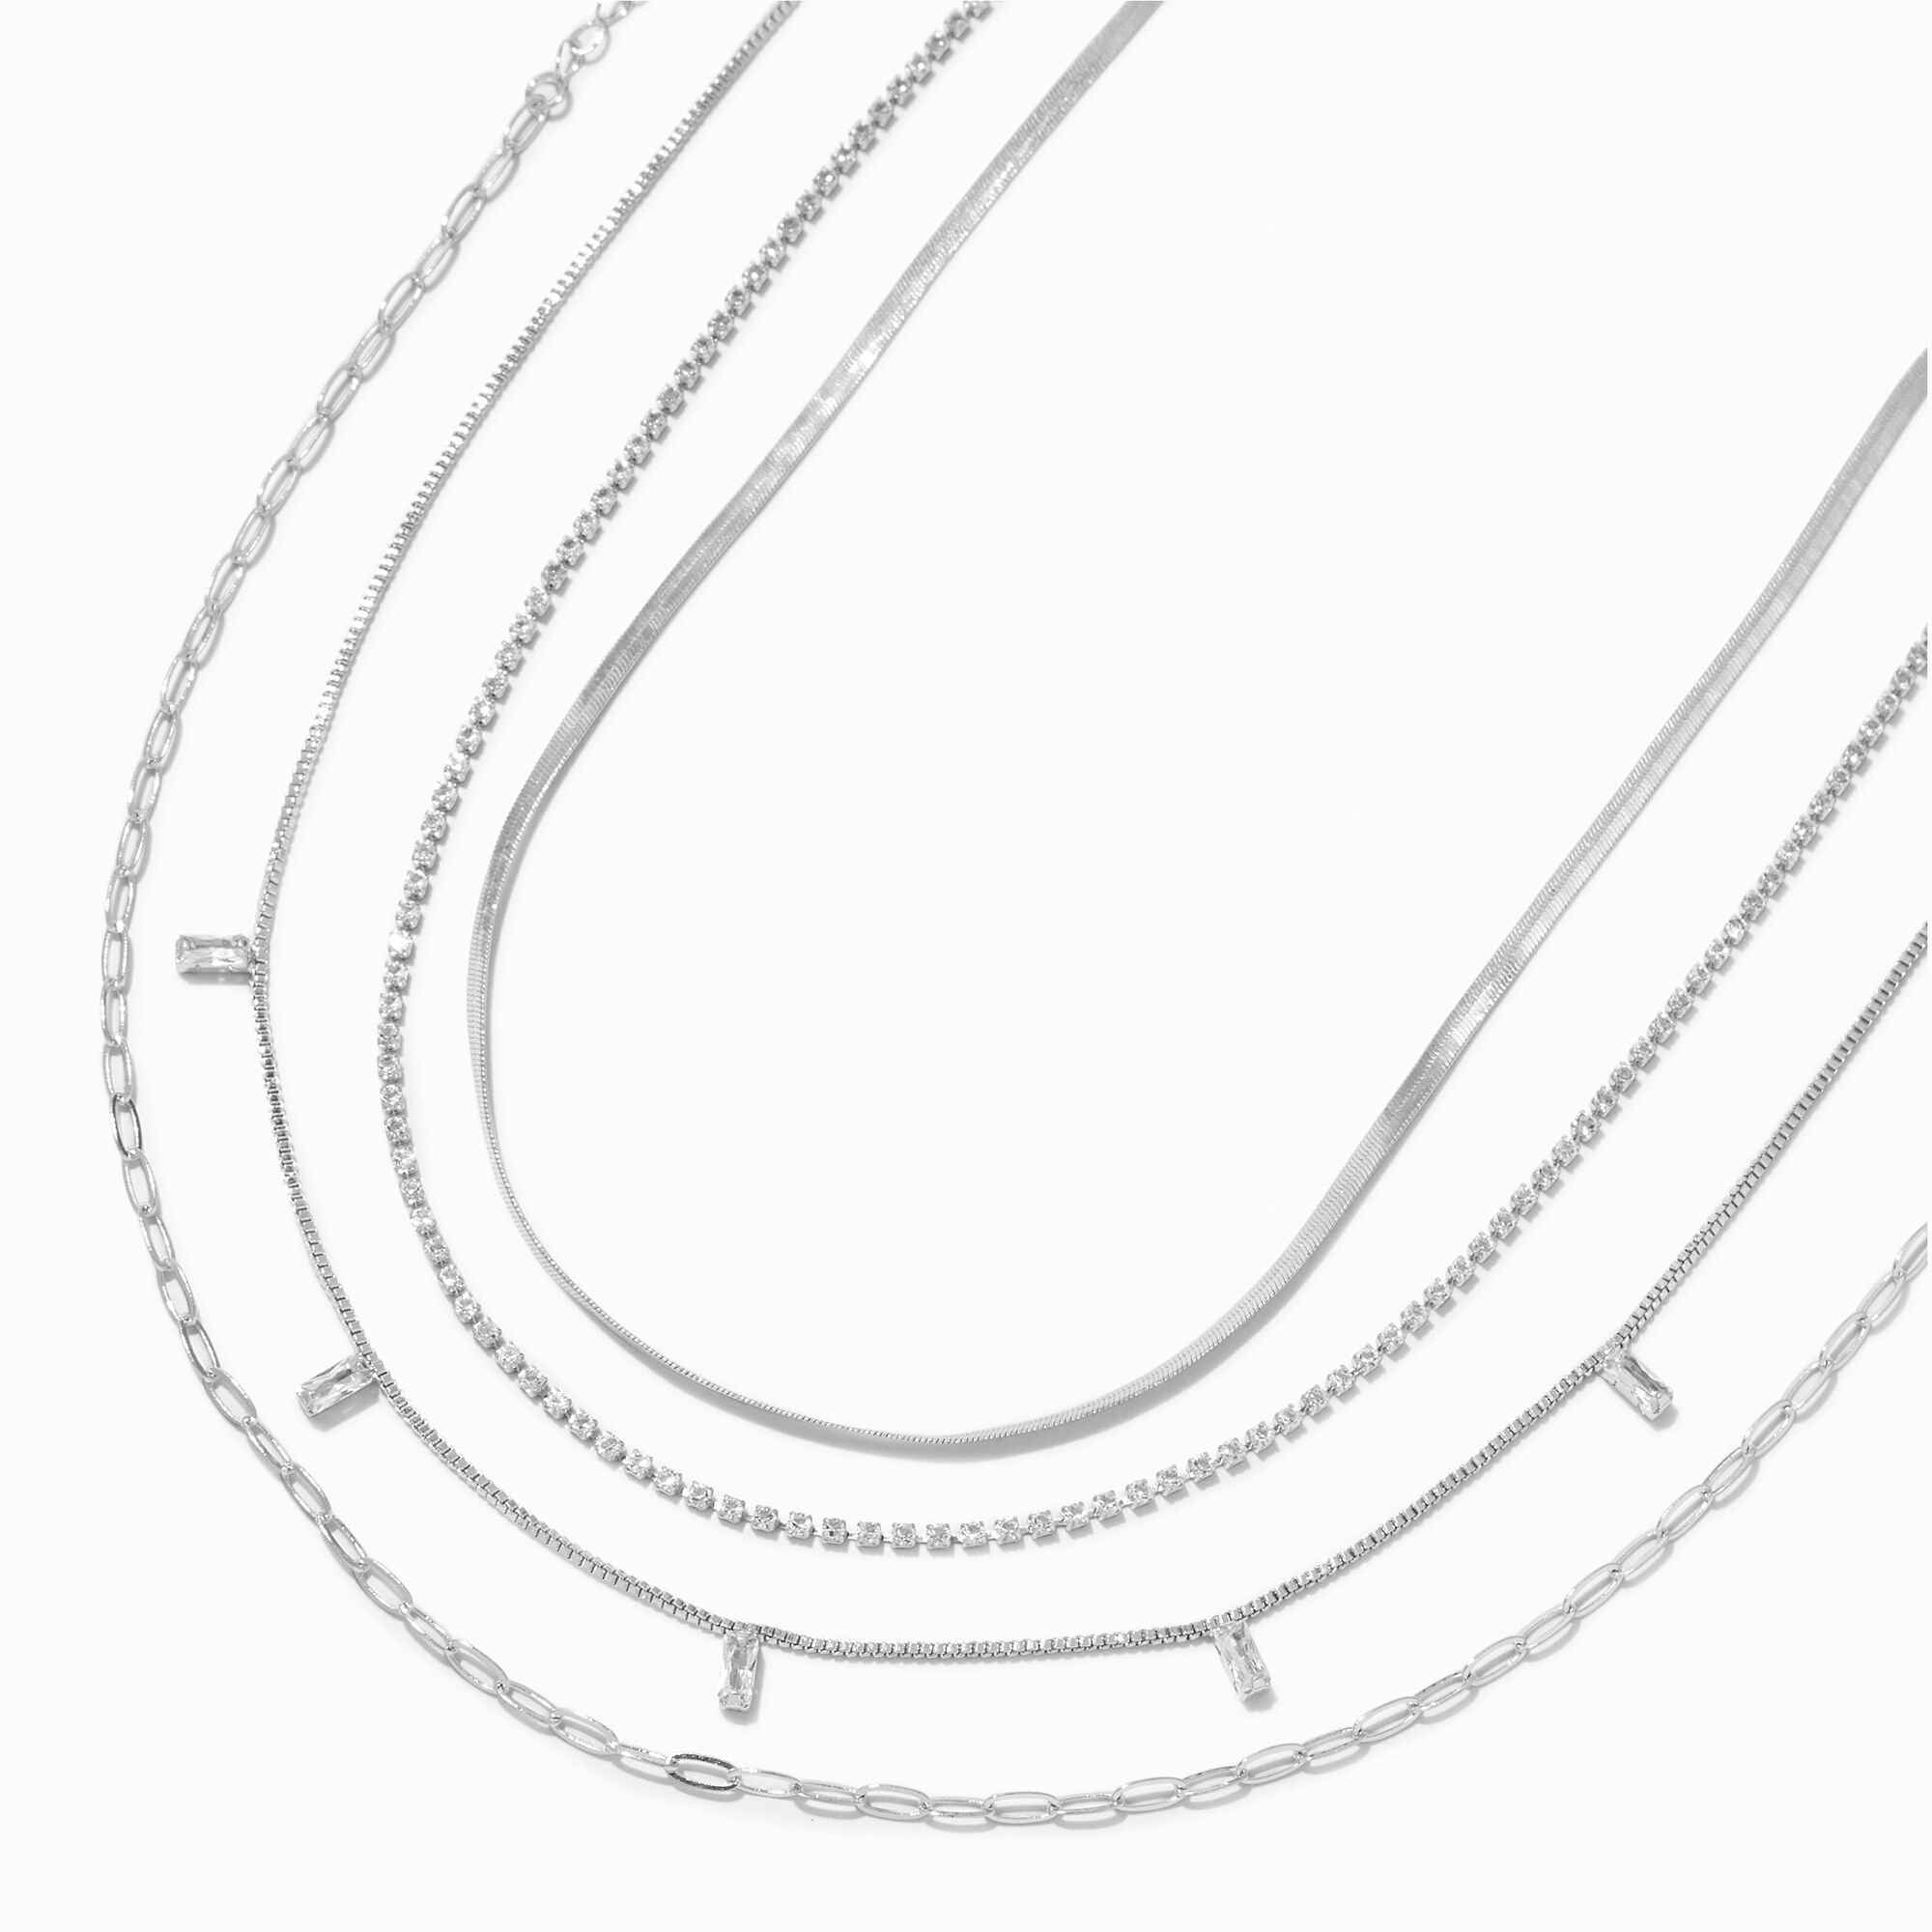 View Claires Tone Paperclip Cubic Zirconia Necklace Set 4 Pack Silver information